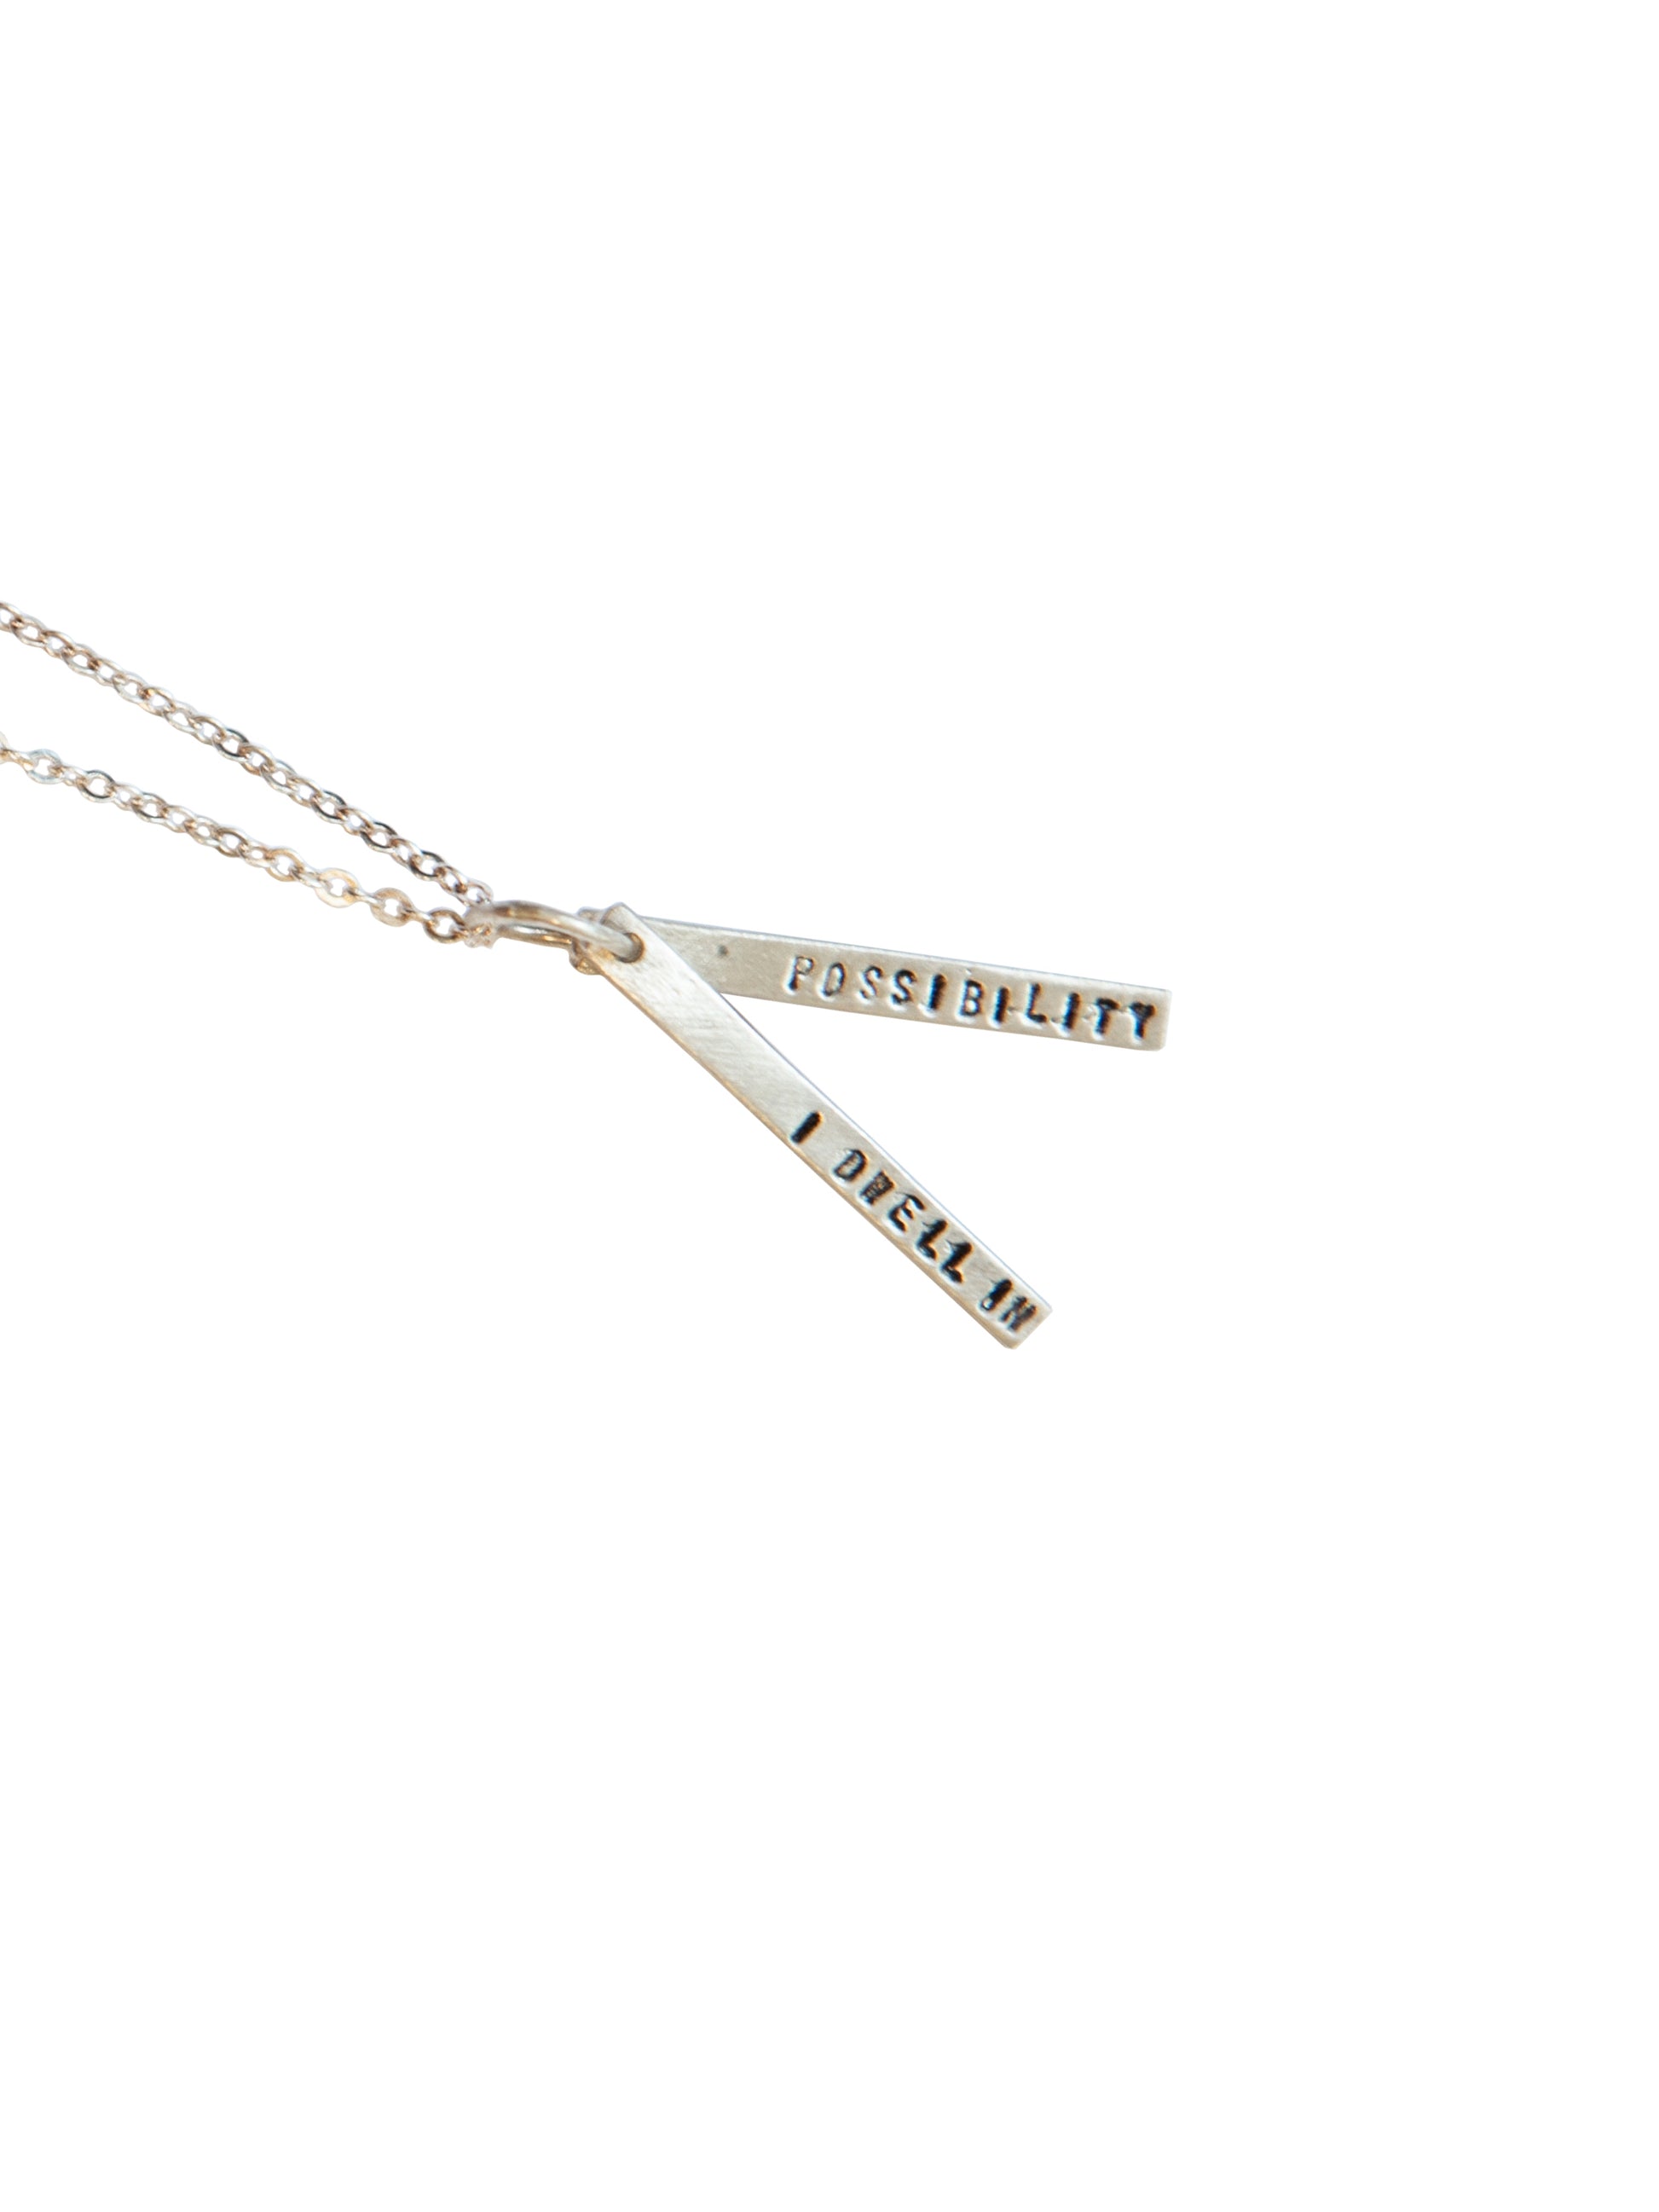 Chocolate & Steel Long-Bar Quote Necklaces Emily Dickinson Possibility Silver Weston Table